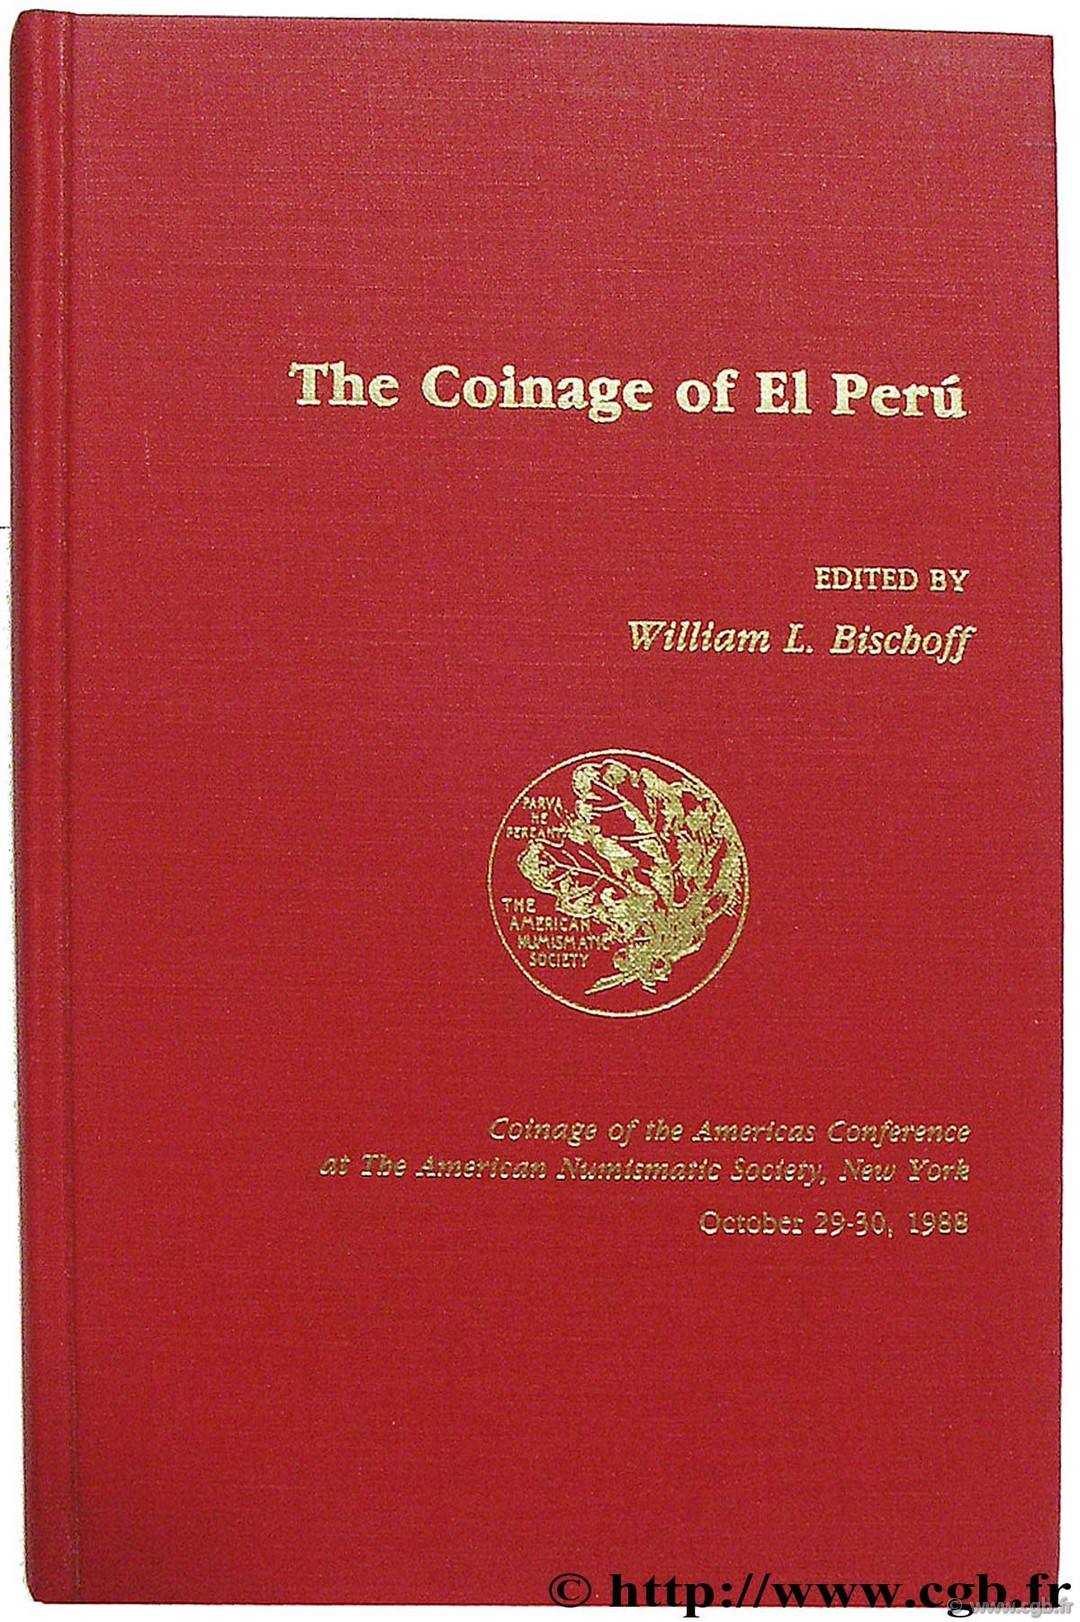 The Coinage of El Perù, Coinage of the Americas Conférence at the American Numismatic Society, New York October 29-30, 1988 